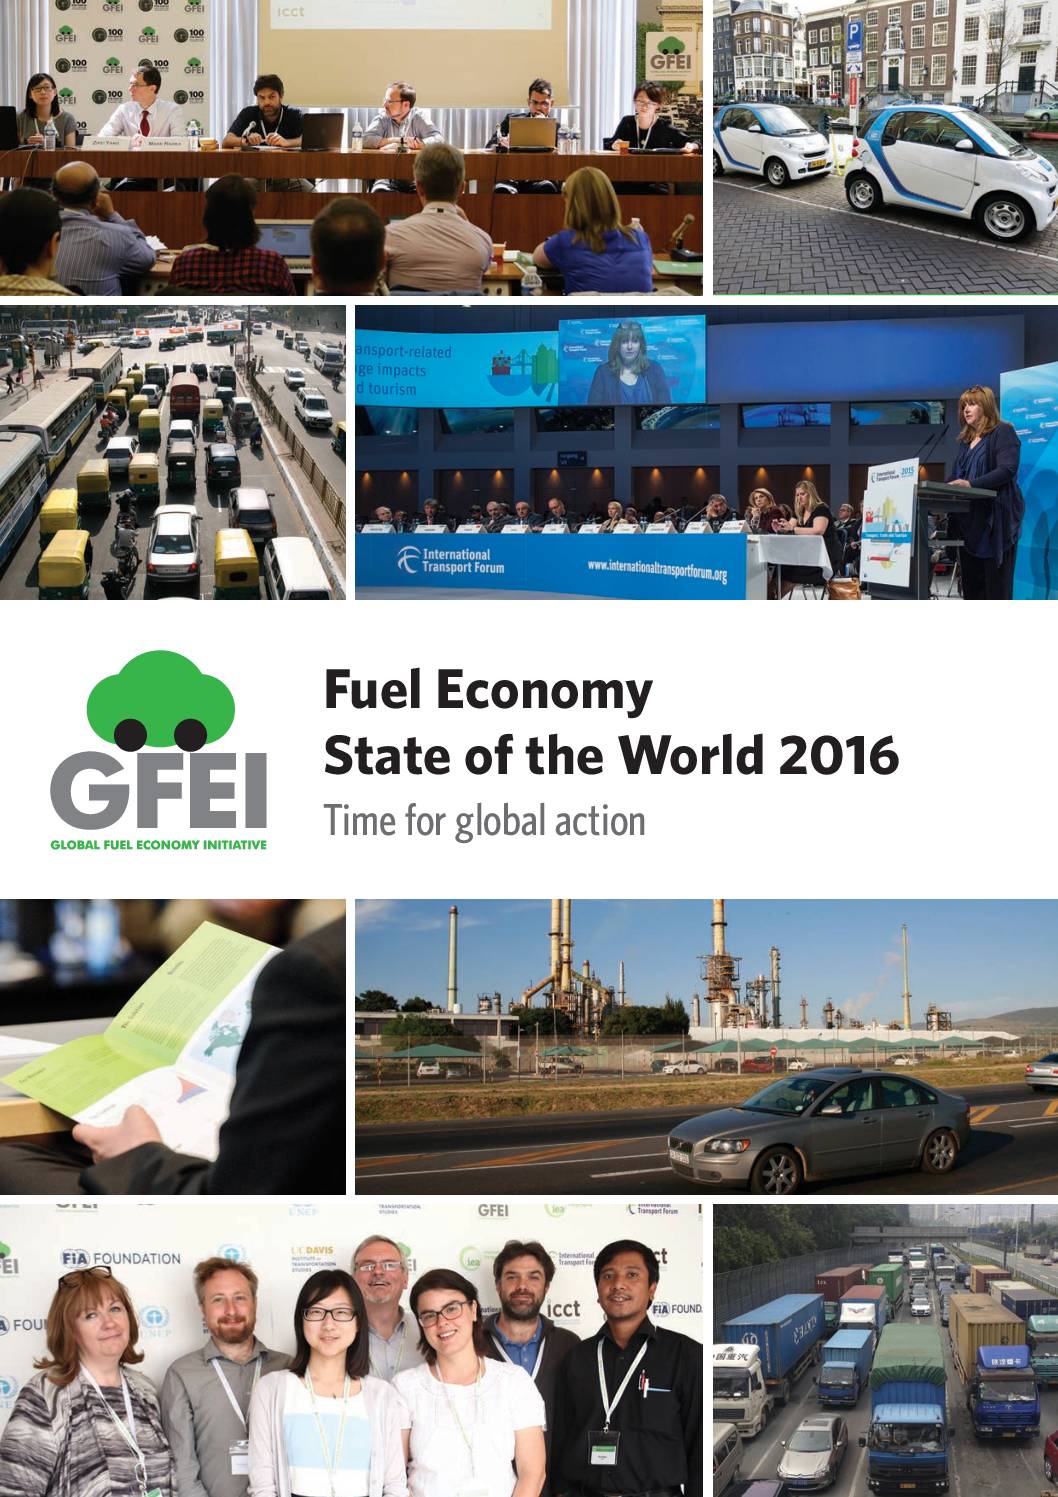 Fuel Economy State of the World 2016